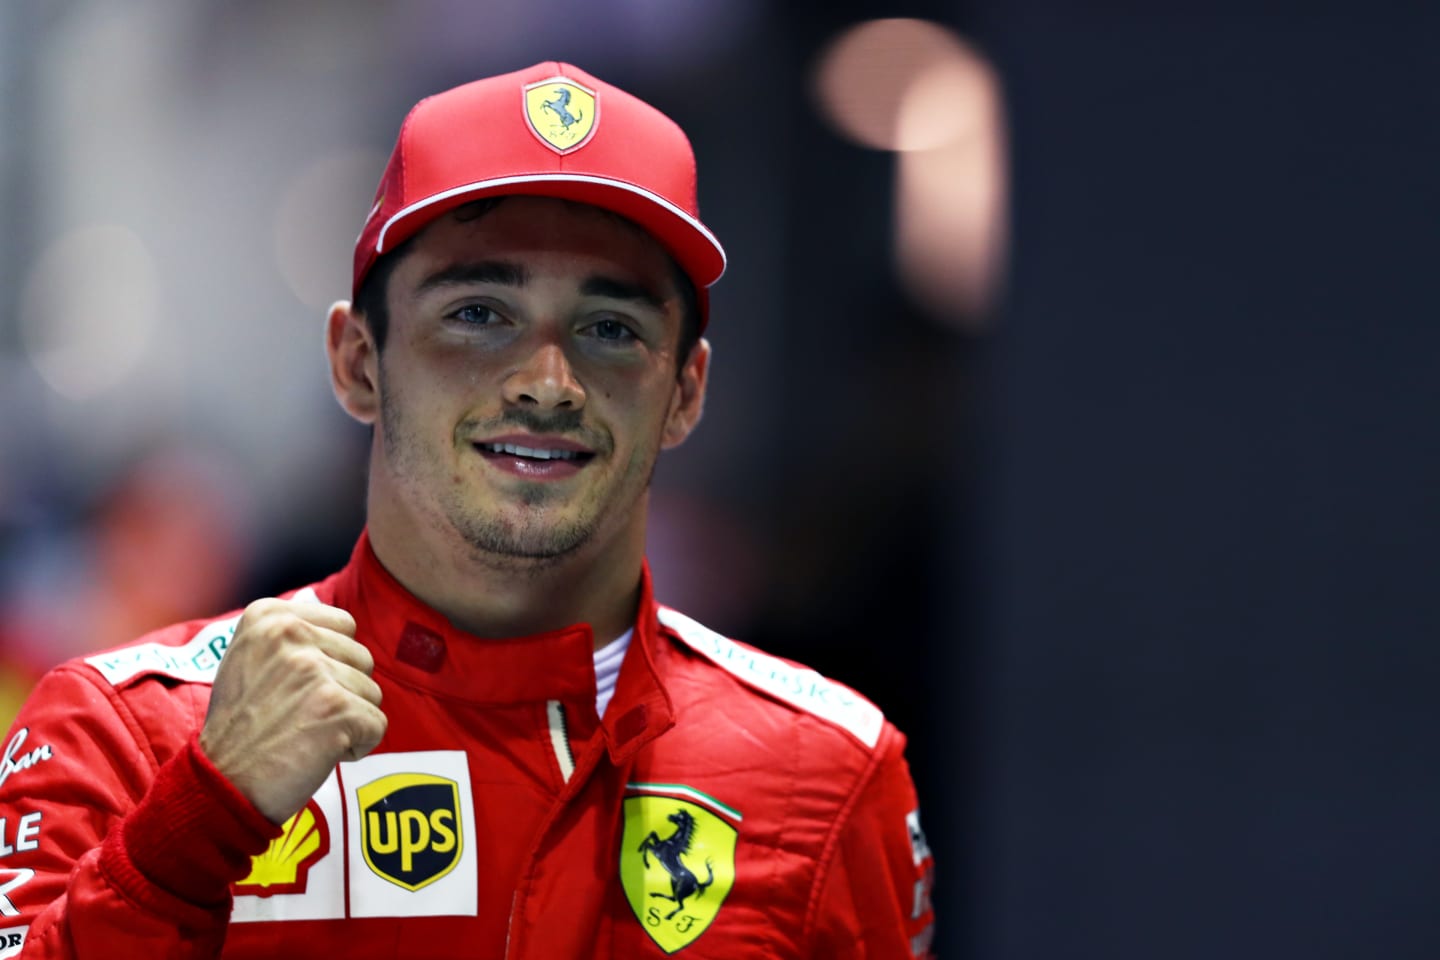 SINGAPORE, SINGAPORE - SEPTEMBER 21: Pole position qualifier Charles Leclerc of Monaco and Ferrari celebrates in parc ferme during qualifying for the F1 Grand Prix of Singapore at Marina Bay Street Circuit on September 21, 2019 in Singapore. (Photo by Mark Thompson/Getty Images)